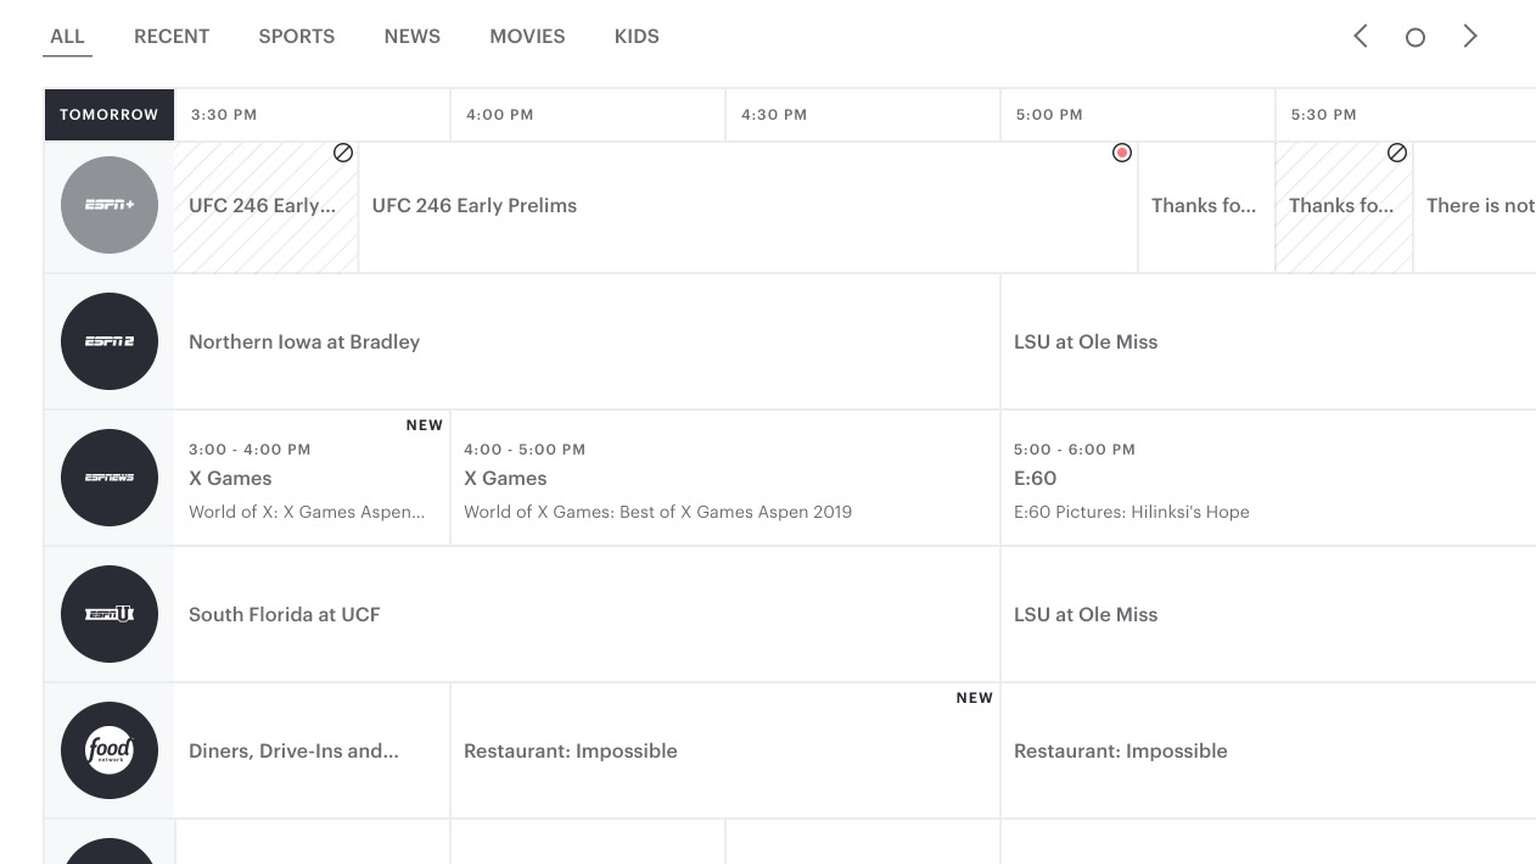 Could Hulu Be Integrating ESPN+? Hulu + Live TV Adds ESPN+ to Live